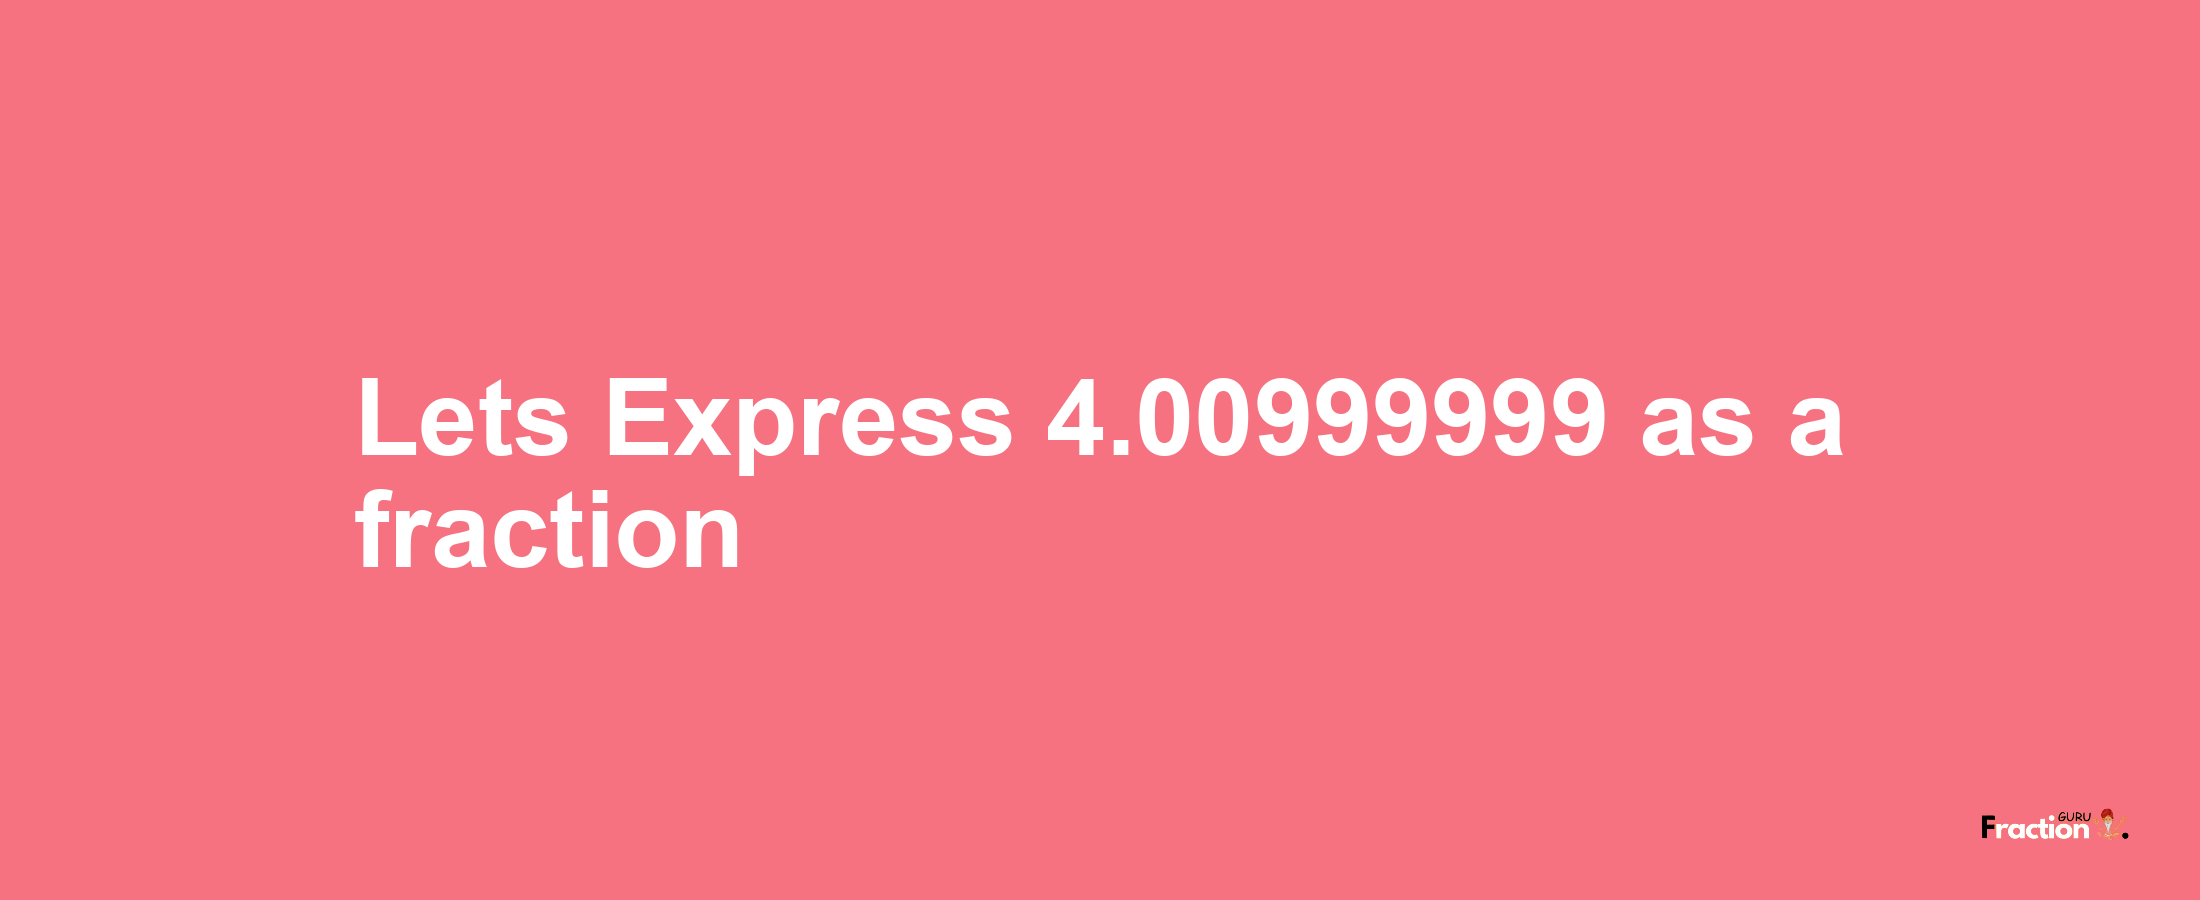 Lets Express 4.00999999 as afraction